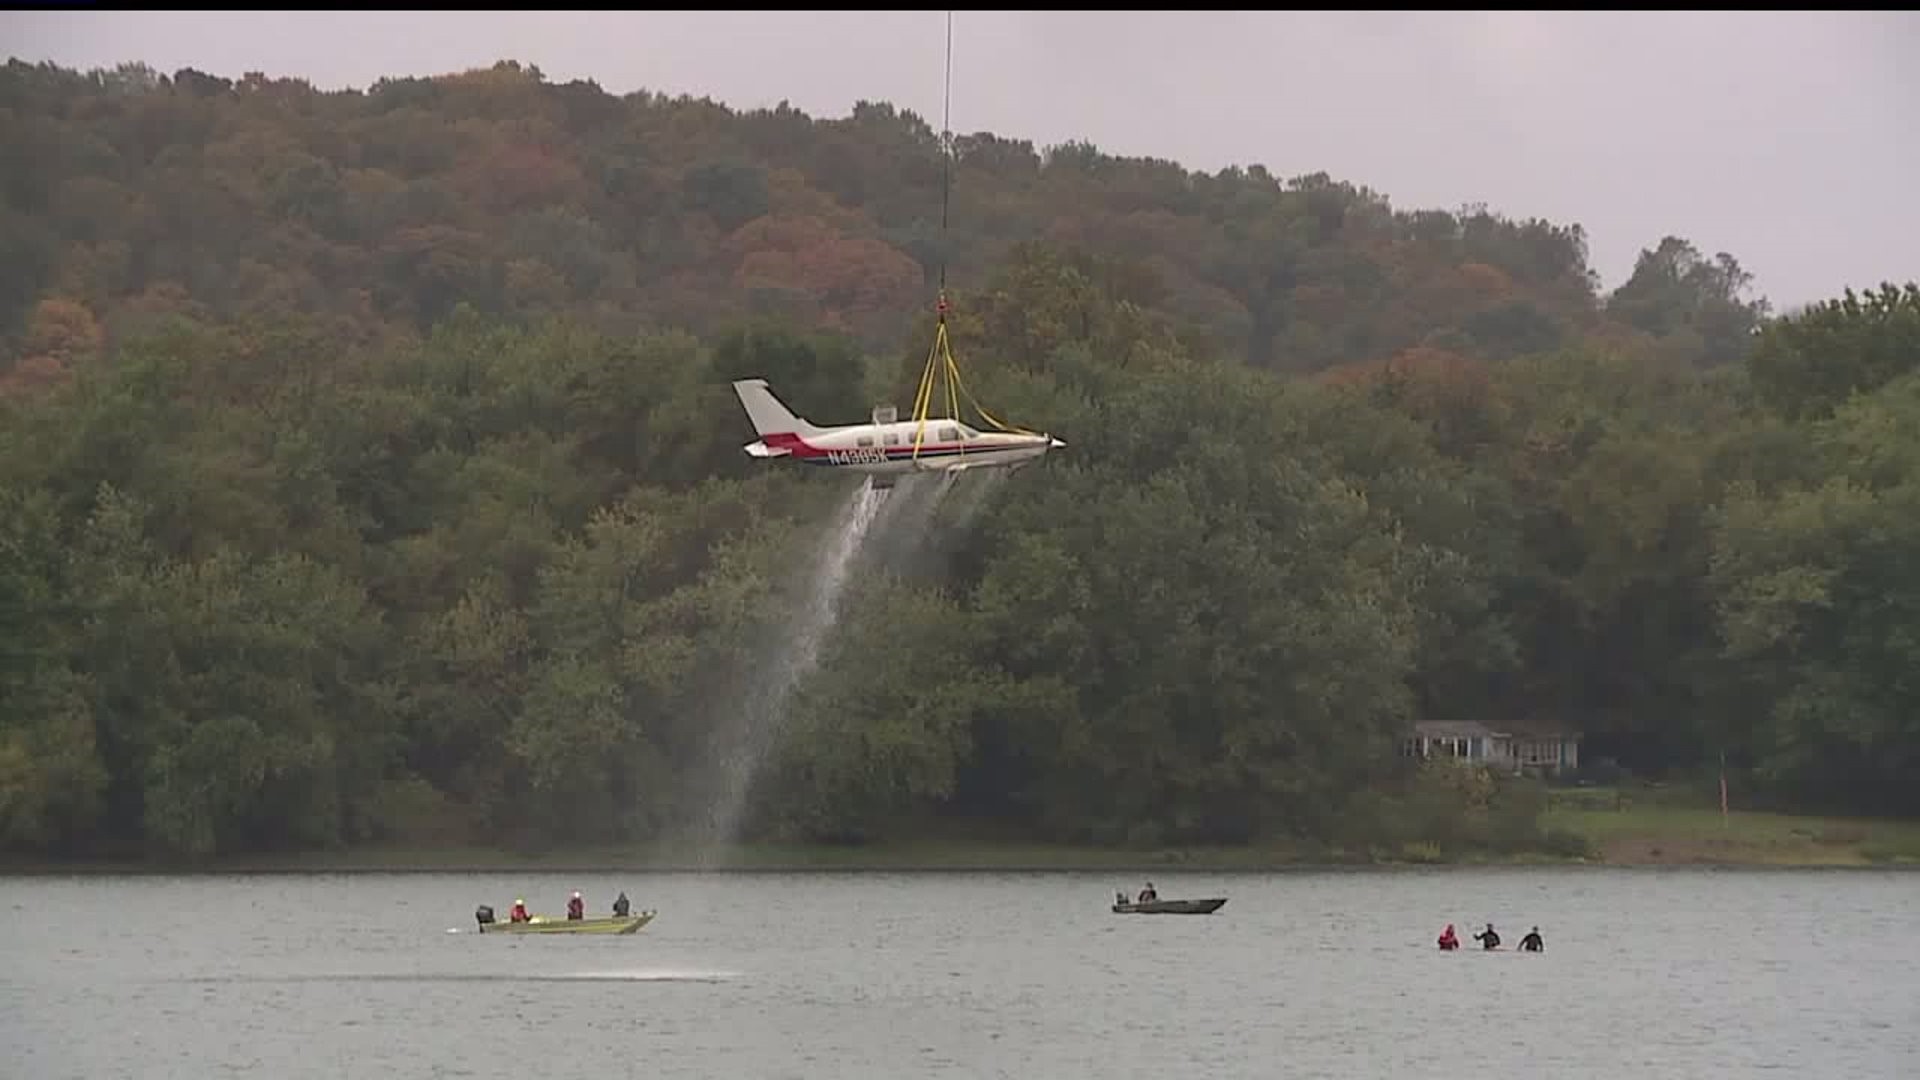 Helicopter removes wreckage of crashed plane from the Susquehanna River